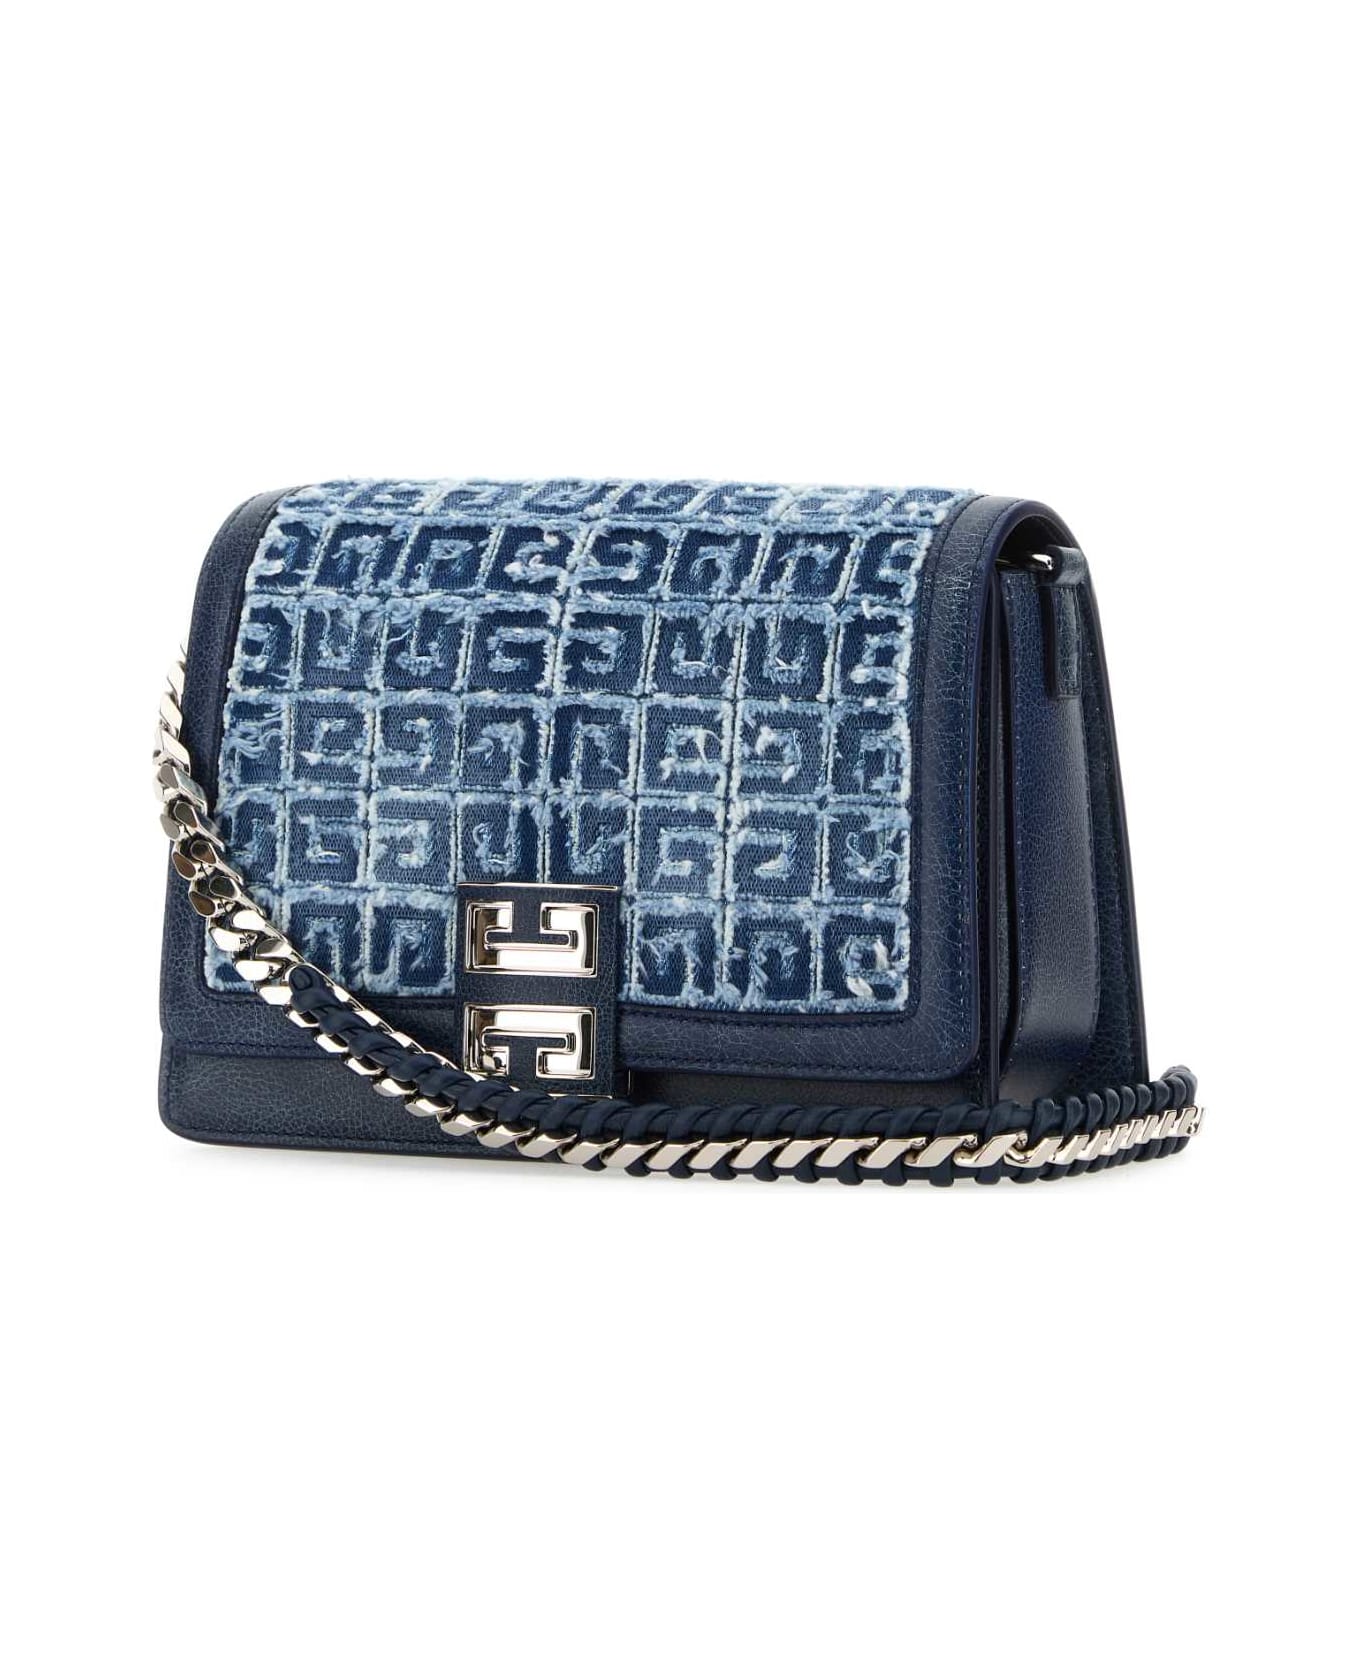 Givenchy Two-tone Denim And Leather Medium Multicarry Shoulder Bag - MEDIUMBLUE